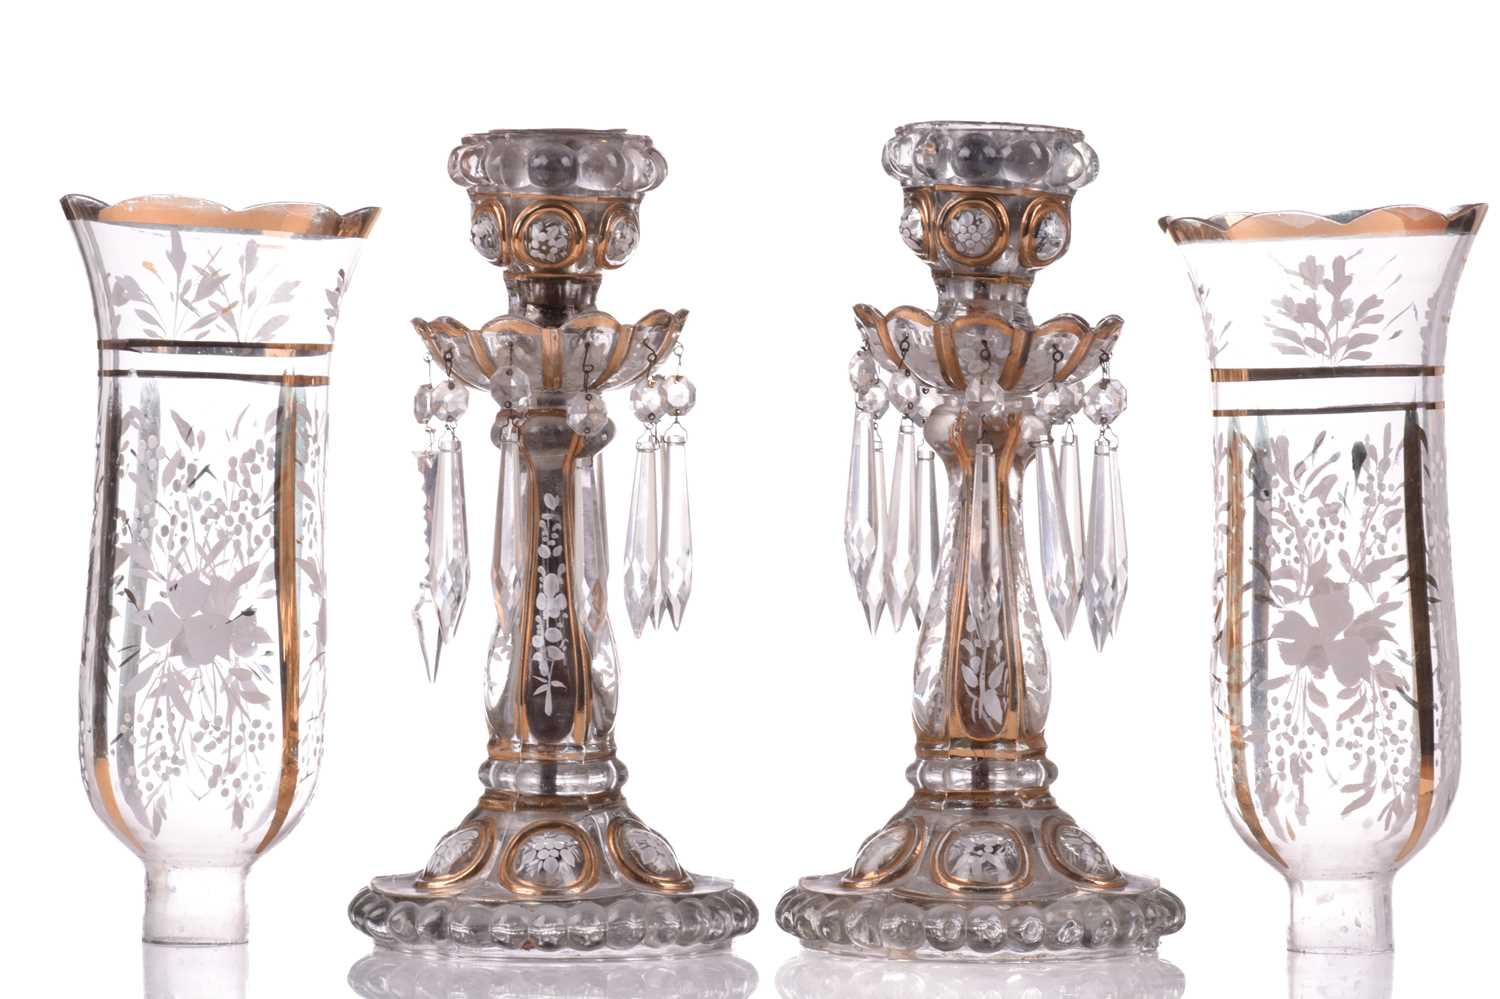 A pair of Victorian glass storm lights, with white enamel floral decoration and gilt highlights, the